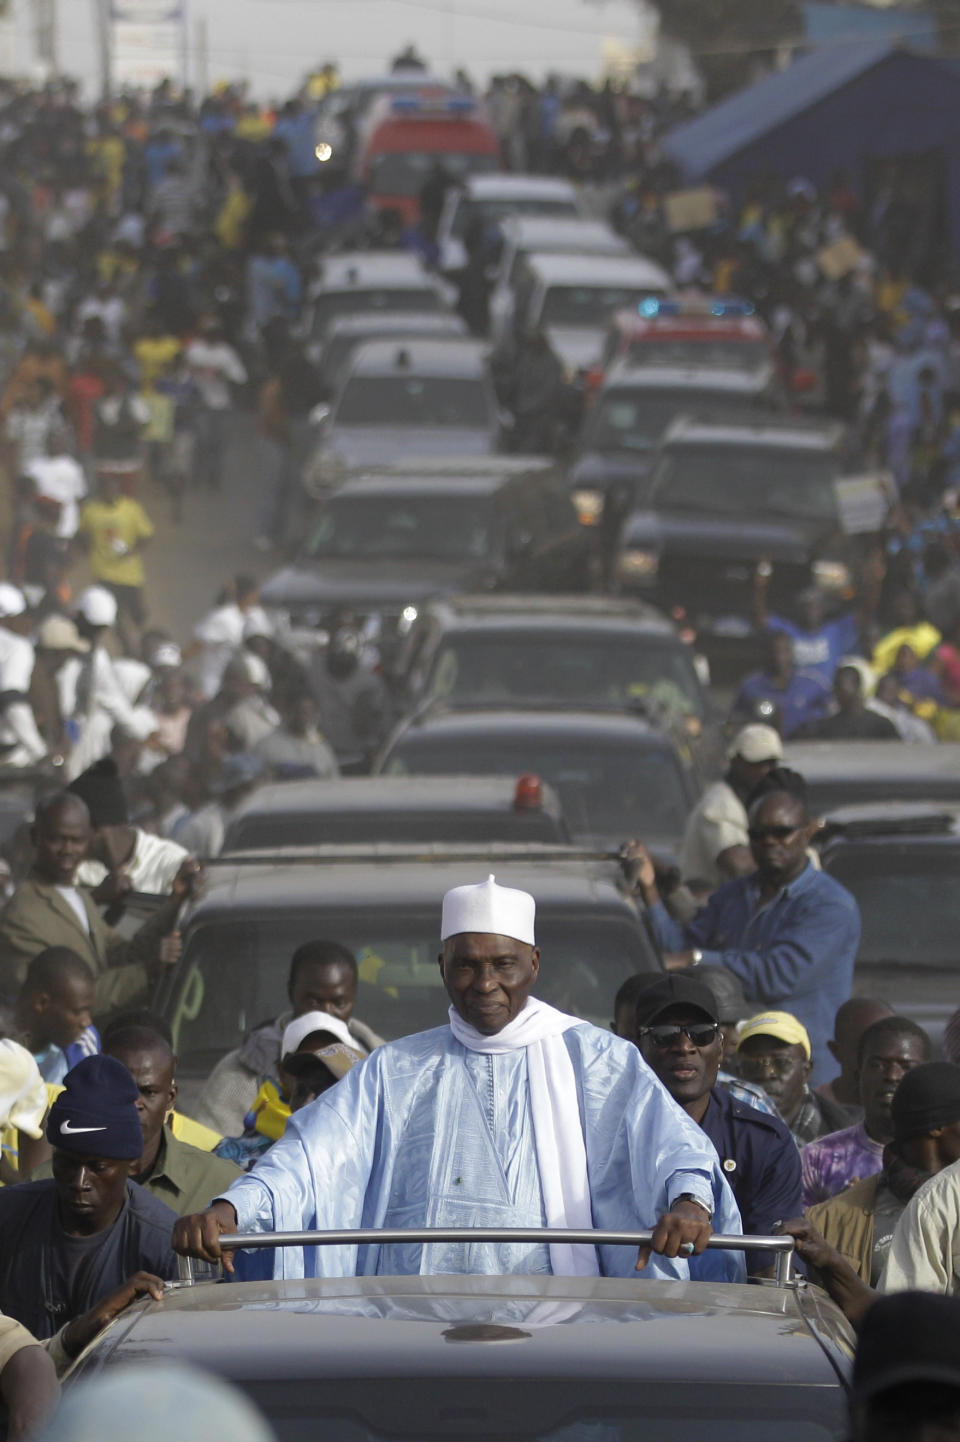 Senegalese President Abdoulaye Wade is surrounded by supporters and security as his convoy travels between campaign stops in downtrodden suburban neighborhoods of Dakar, Senegal Wednesday, Feb. 22, 2012. Thousands of supporters turned out to see Wade as he held rallies in the Pikine and Guediawaye neighborhoods on Wednesday. Daily protests have rocked the capital after the opposition vowed to render the country ungovernable if 85-year-old Wade runs for a third term in Sunday's elections.(AP Photo/Rebecca Blackwell)